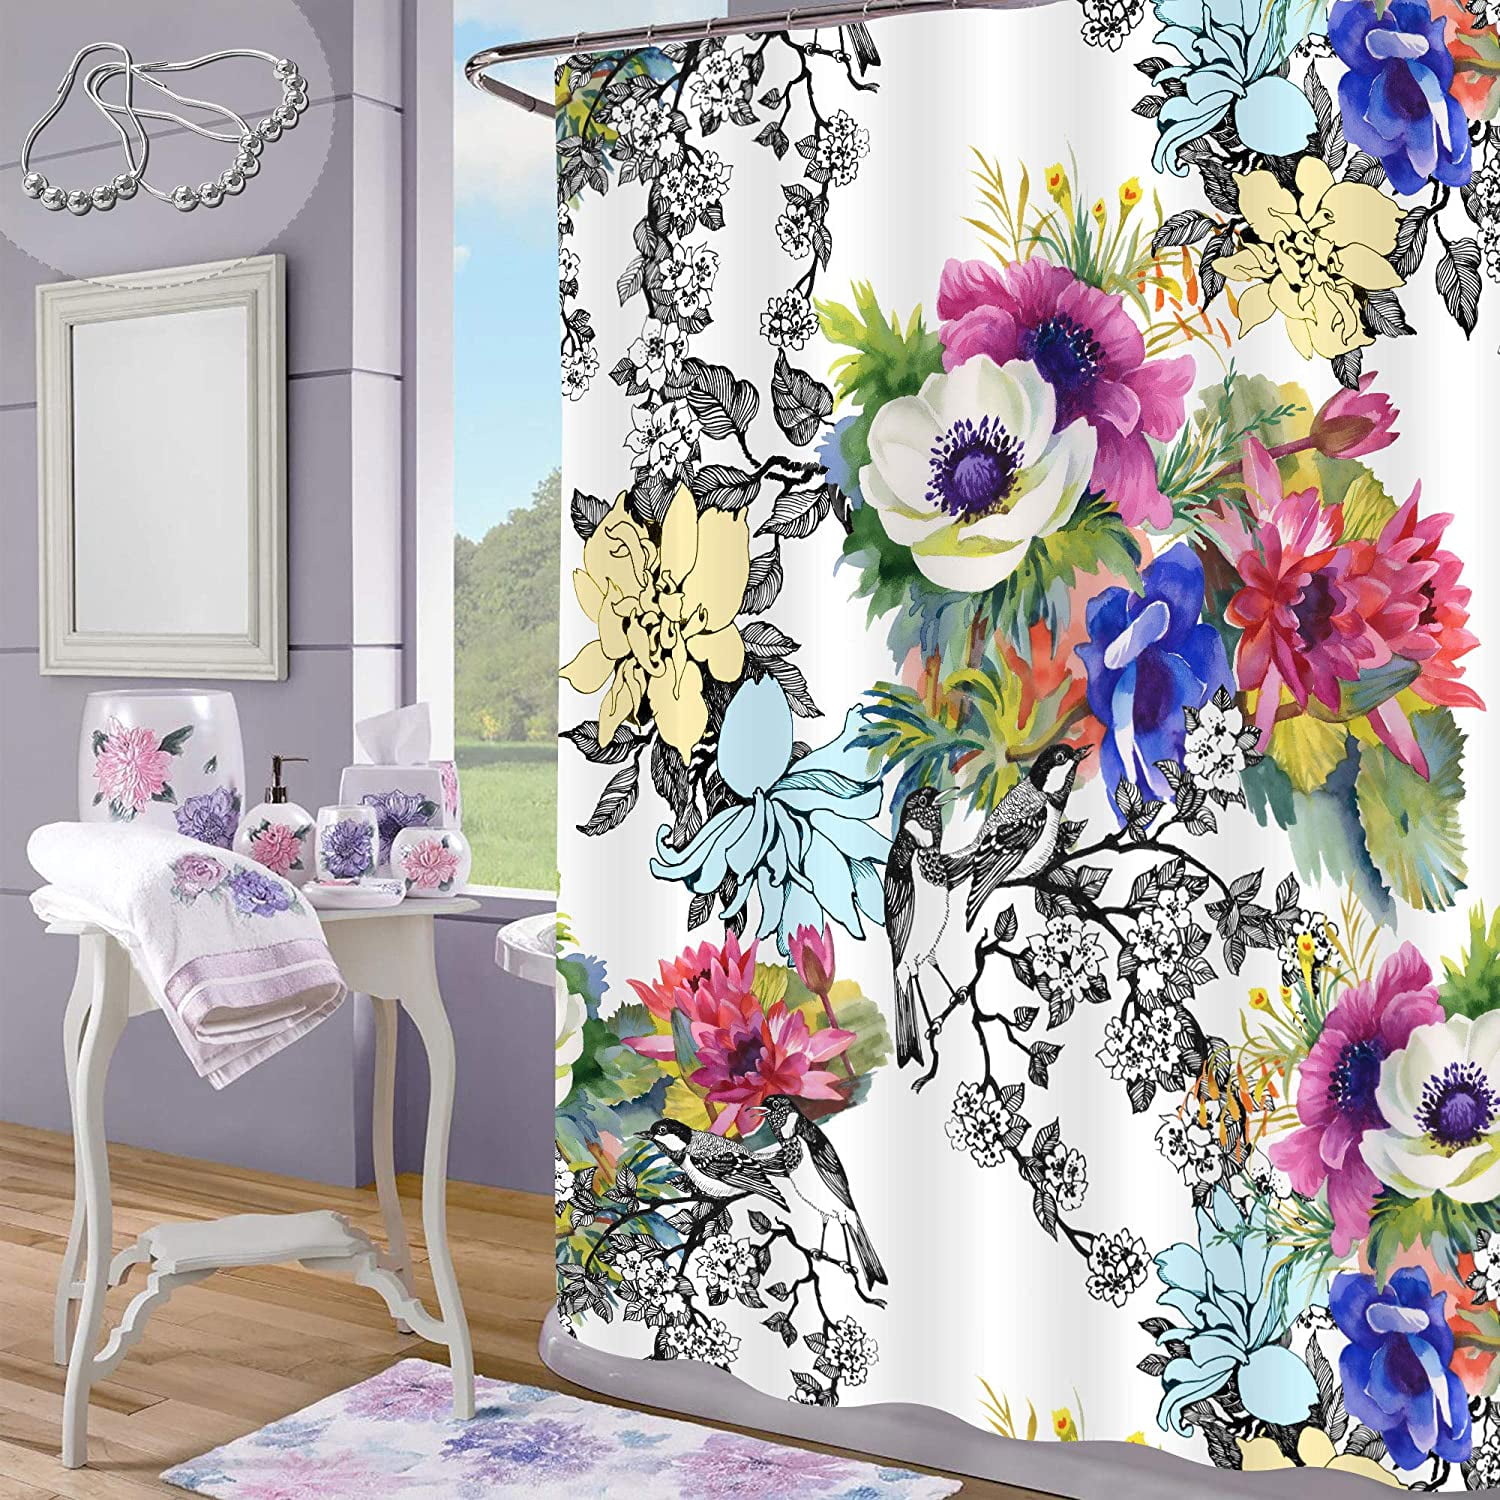 Colorful Flower Painting Painting Flower Painting Painting Shower Curtain Colorful Floral Colorful Flower Shower Curtain